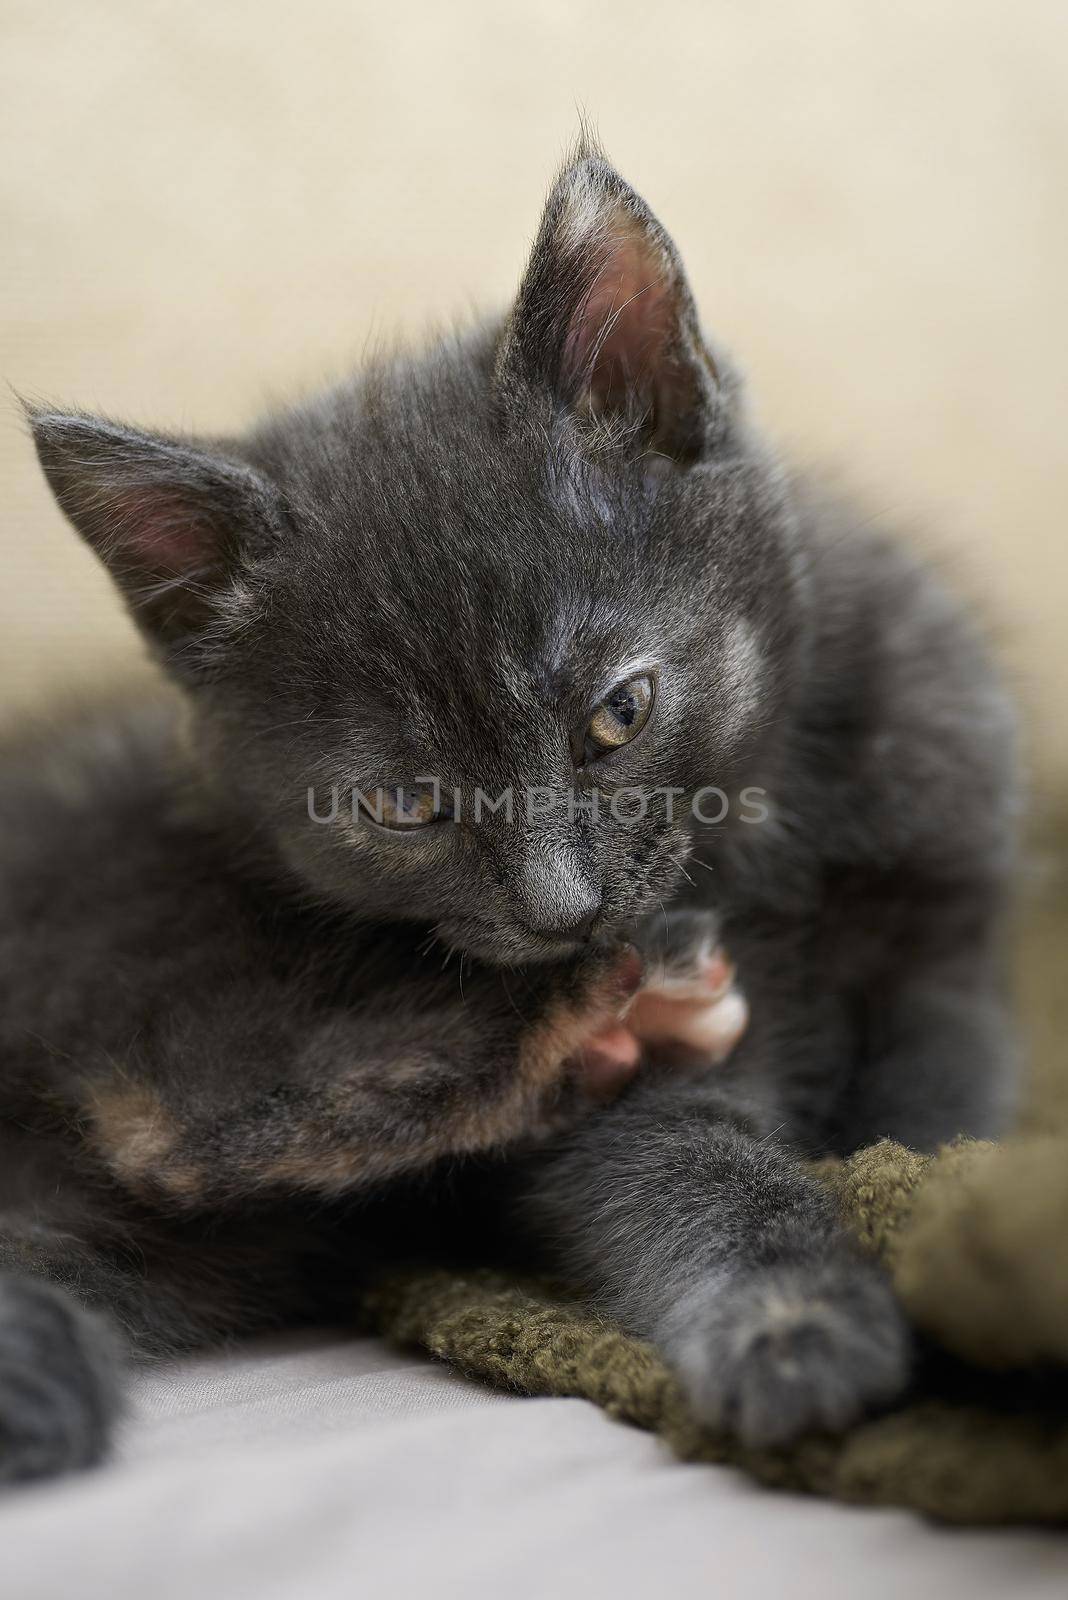 Image of a fluffy kitten of a smoky color, washes and licks its paw, looks at the camera. by izik